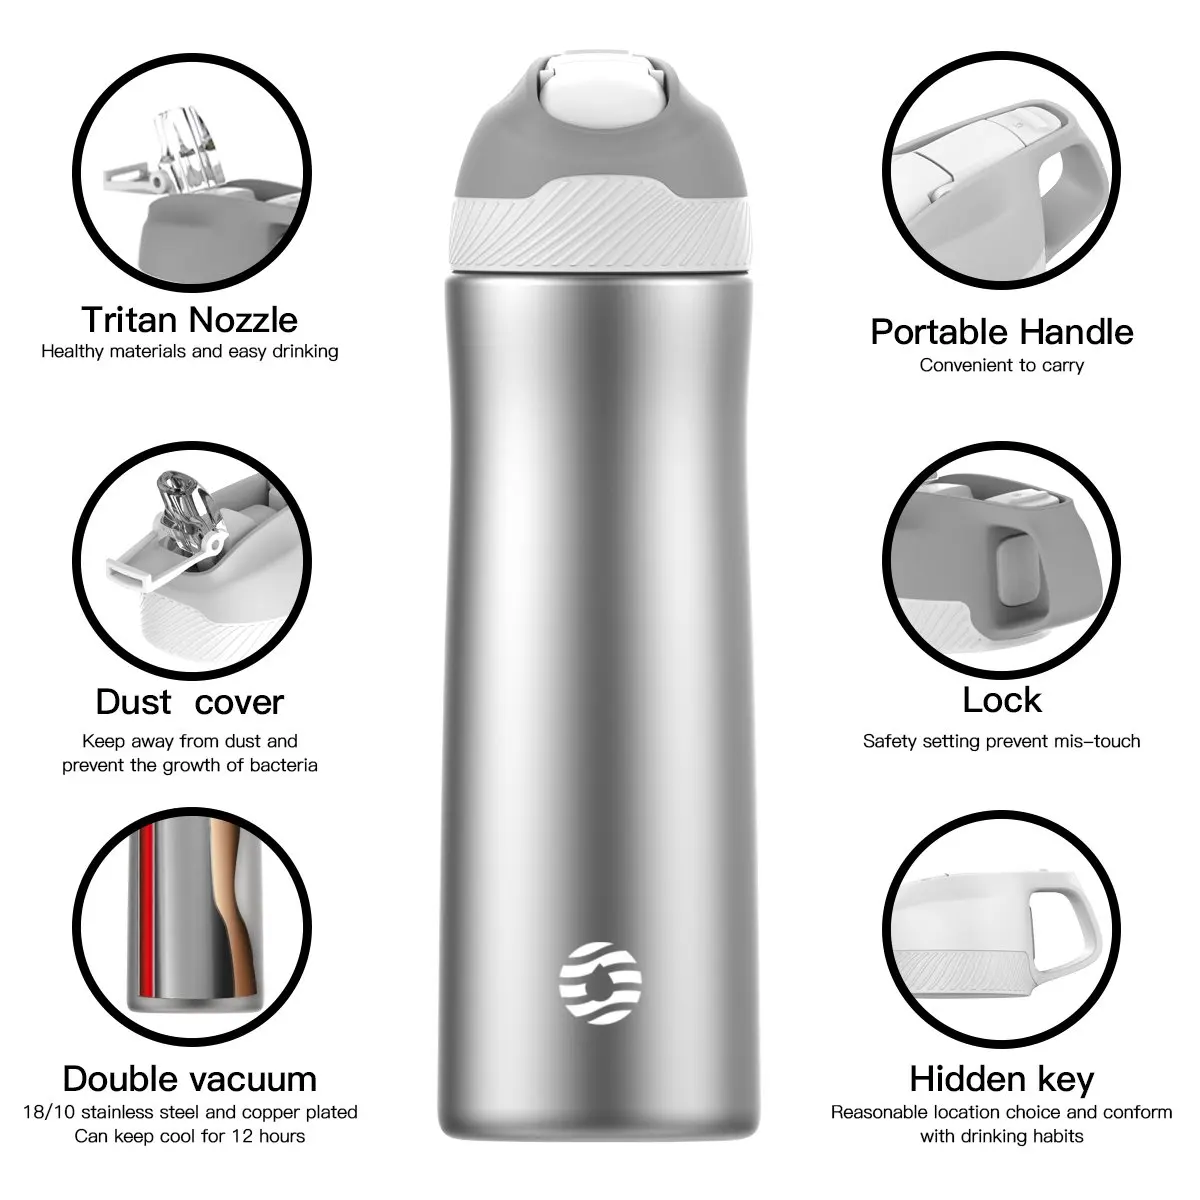 FJbottle Insulated Water Bottles with Straw Perfect Gifts for Girl and Lady 20 oz-25 oz Double Wall Vacuum Insulated Stainless Steel Bottle Keeps Hot and Cold With Cleaning Brush 